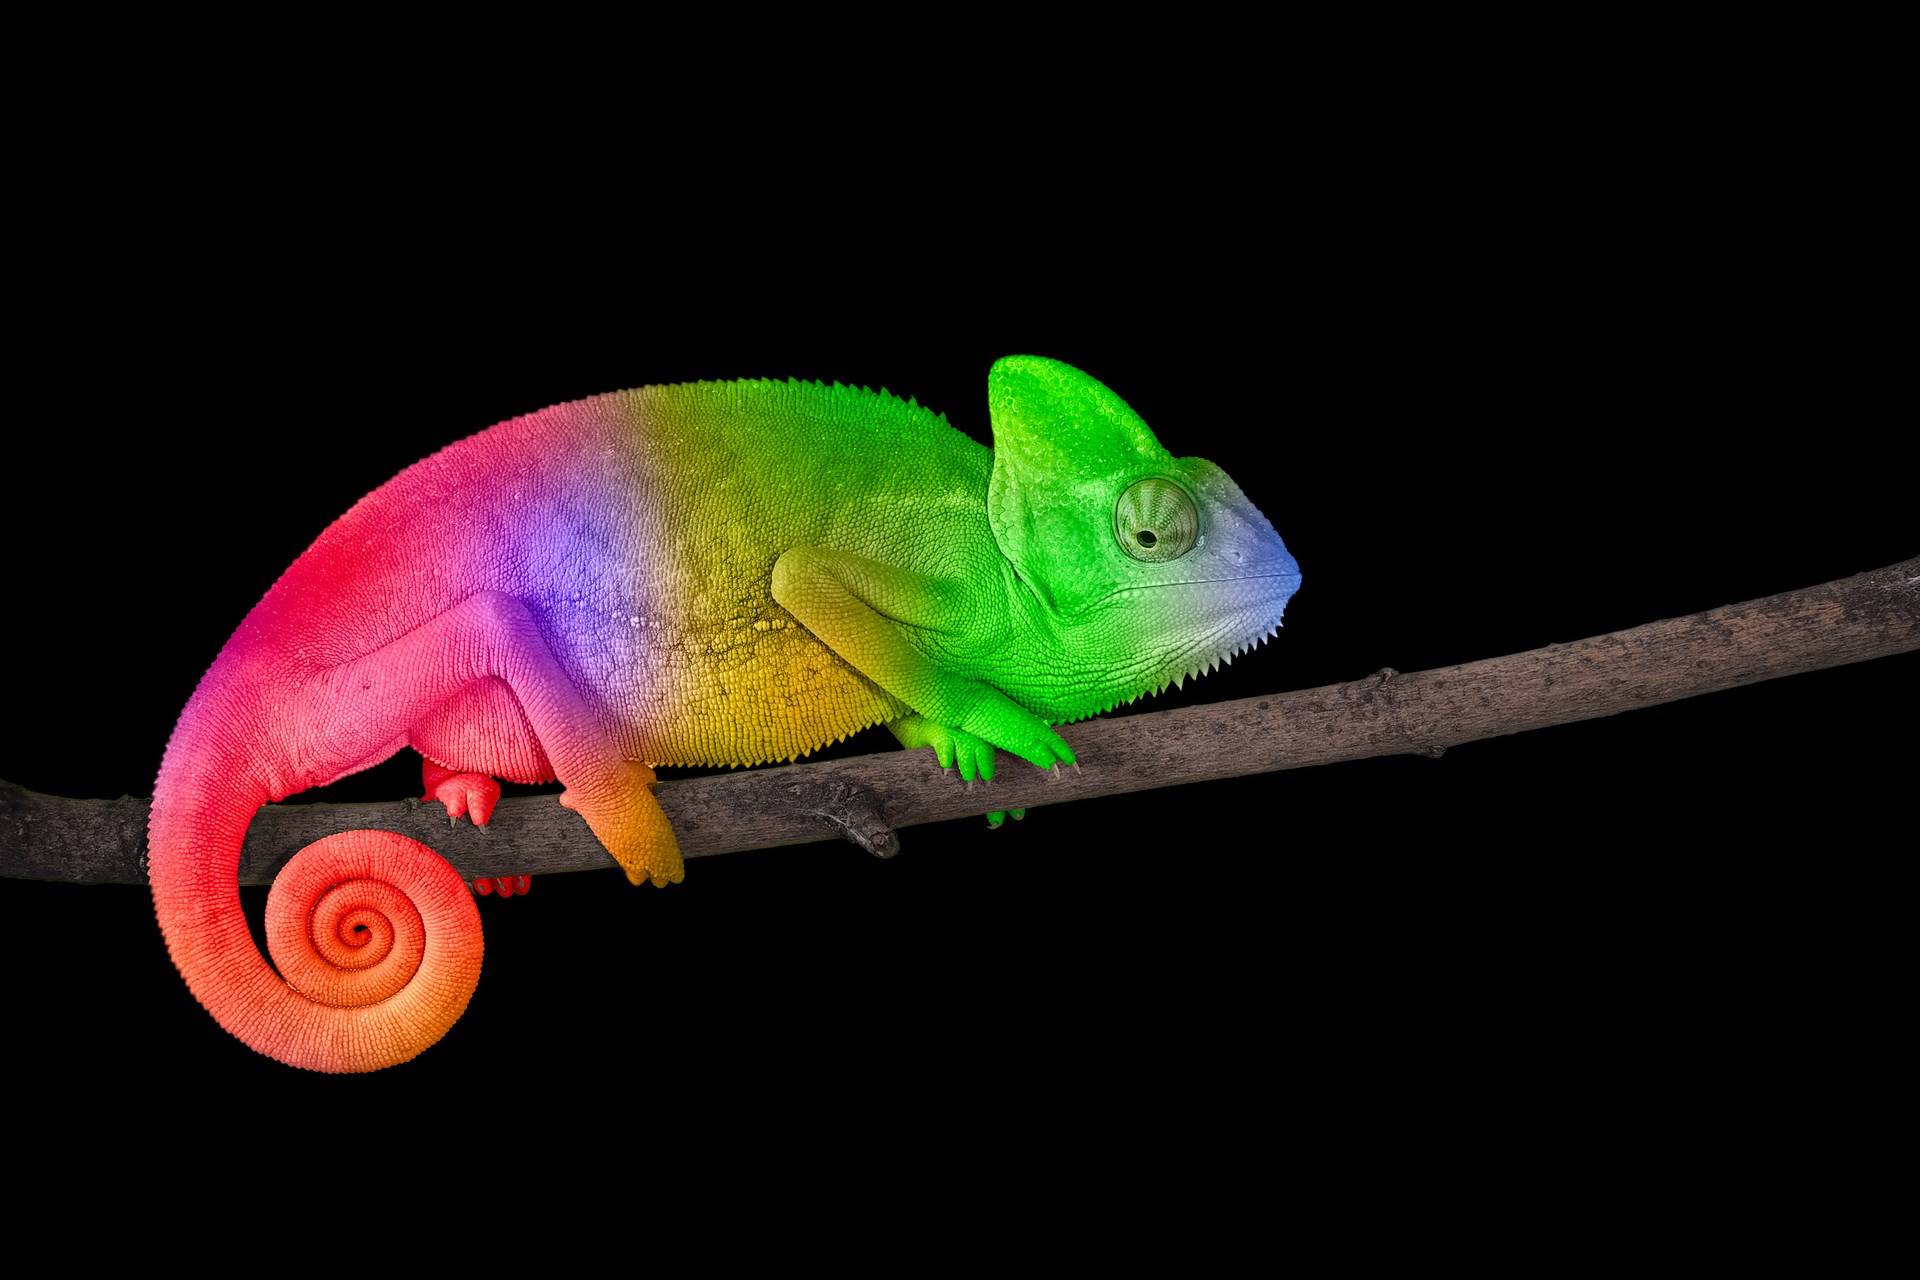 Chameleon on a branch with a spiral tail. Bright colorful rainbow color scales